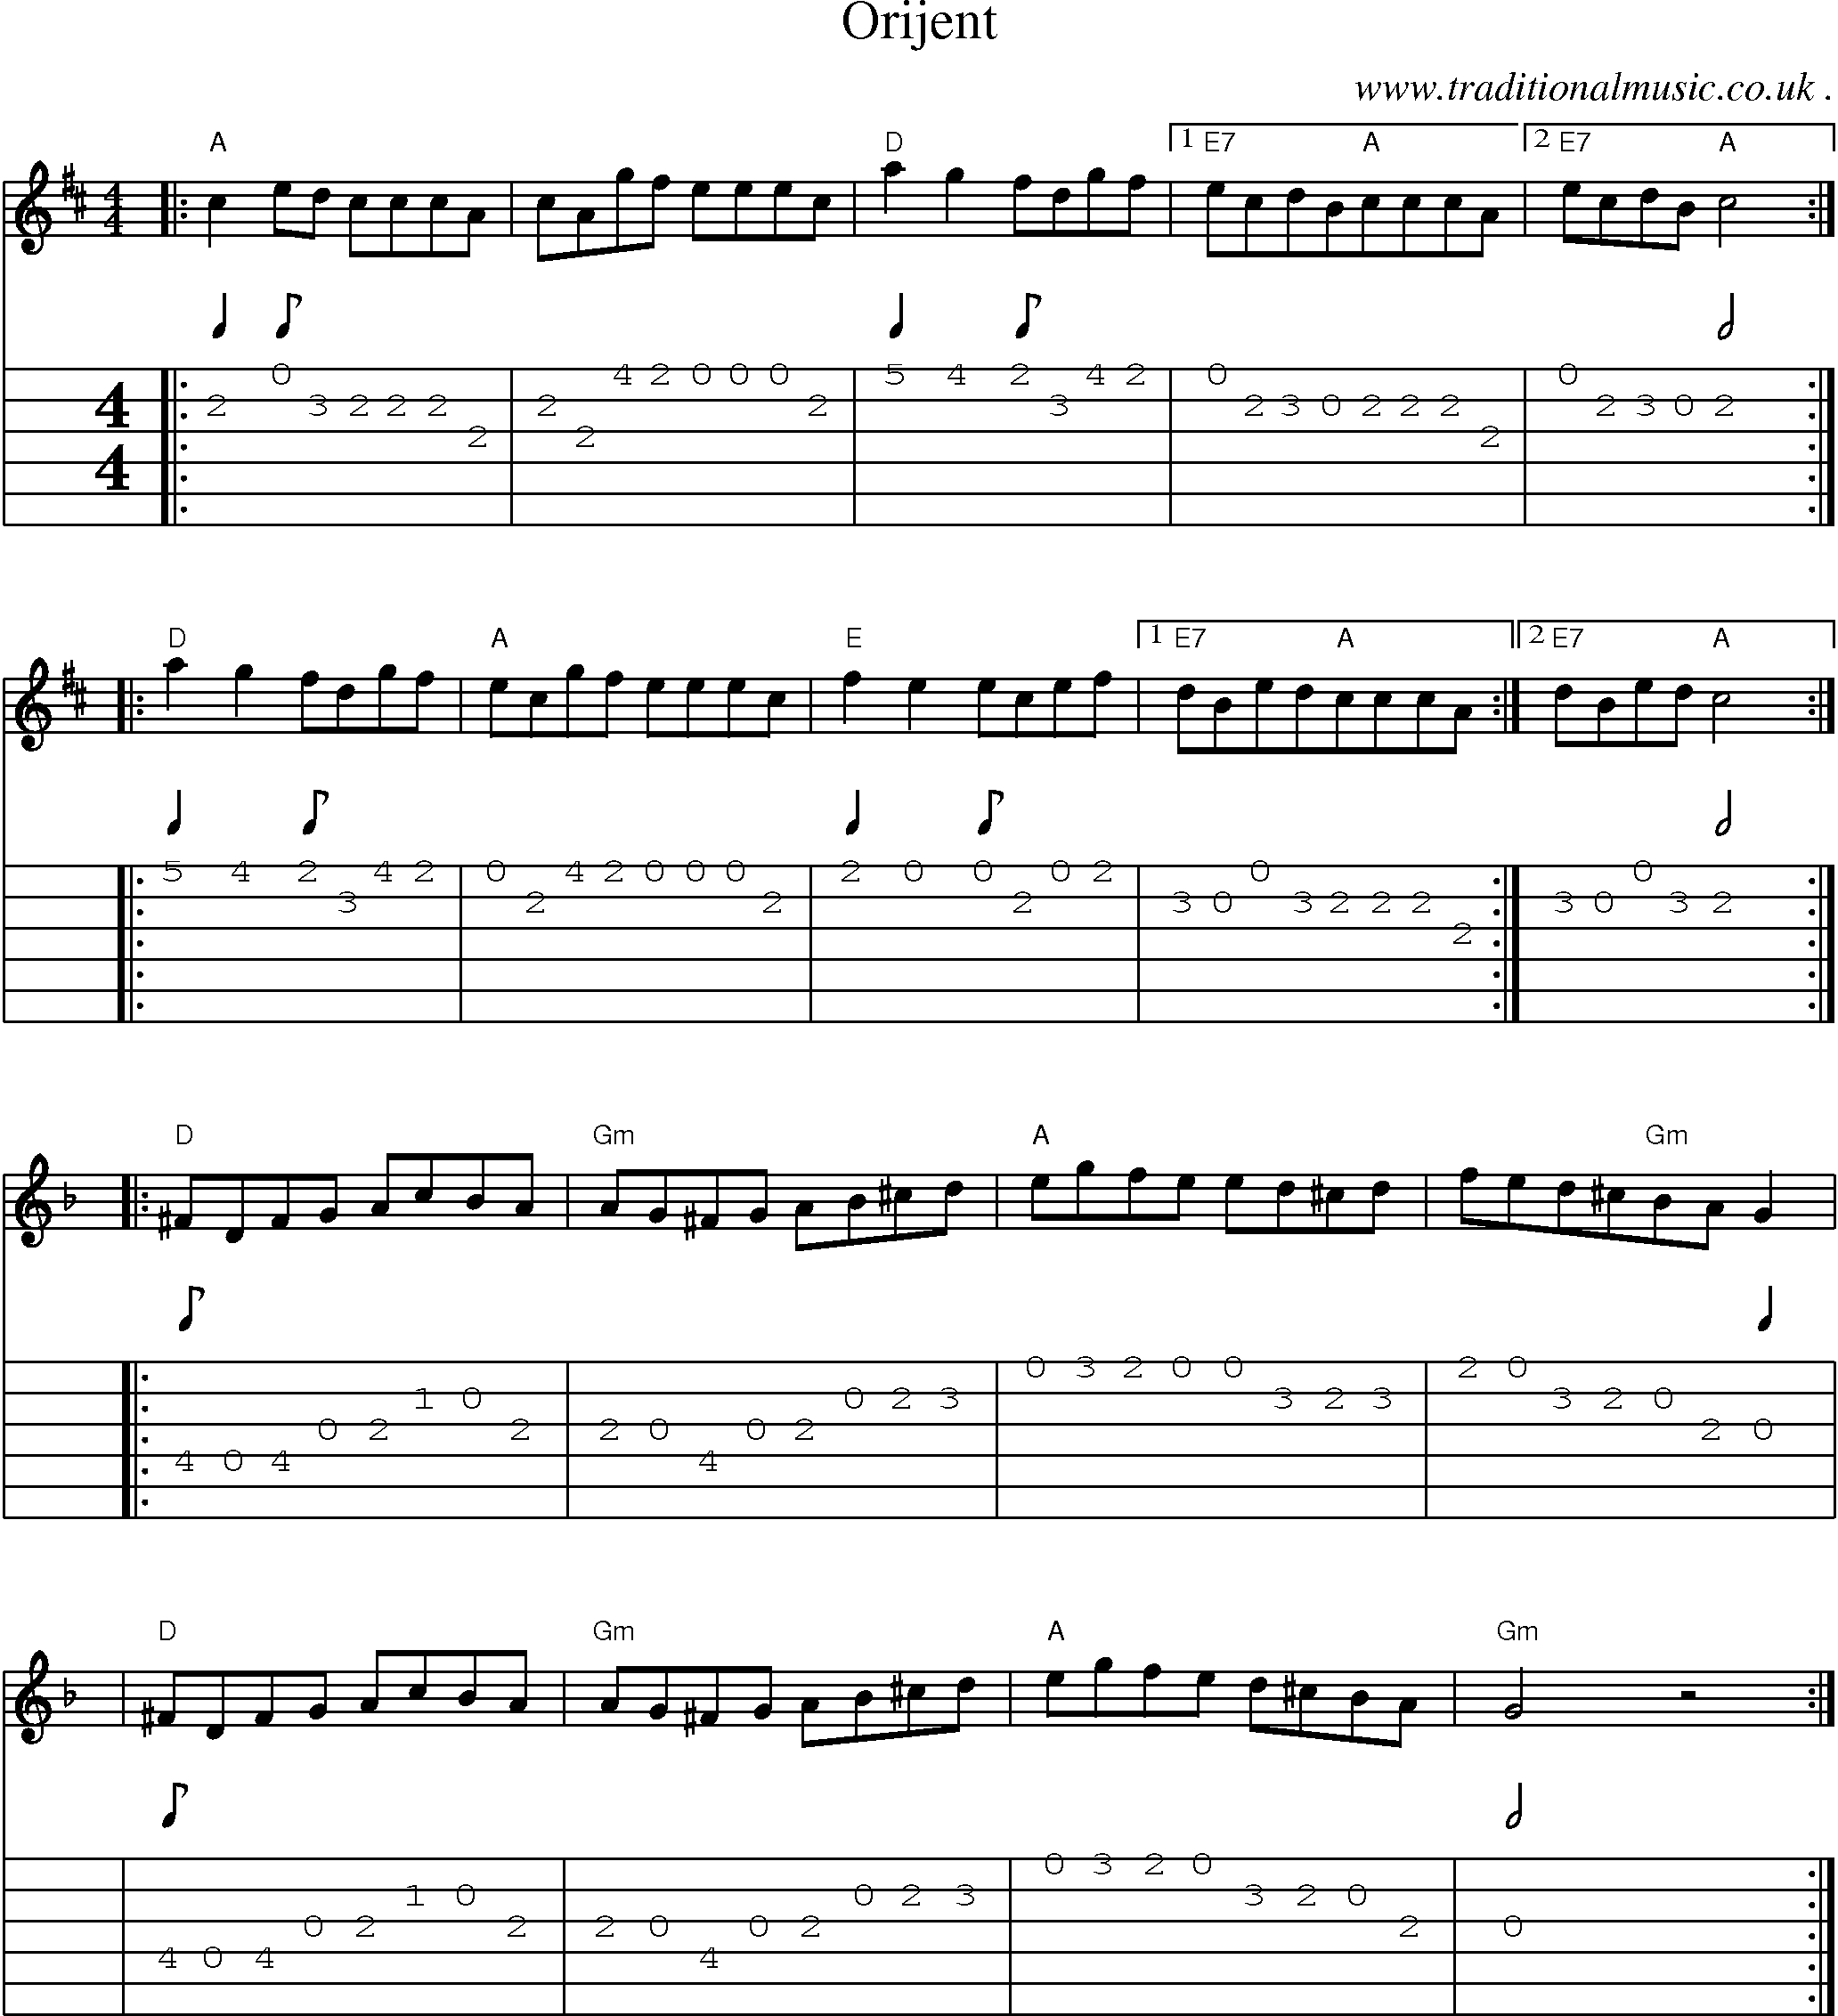 Sheet-Music and Guitar Tabs for Orijent